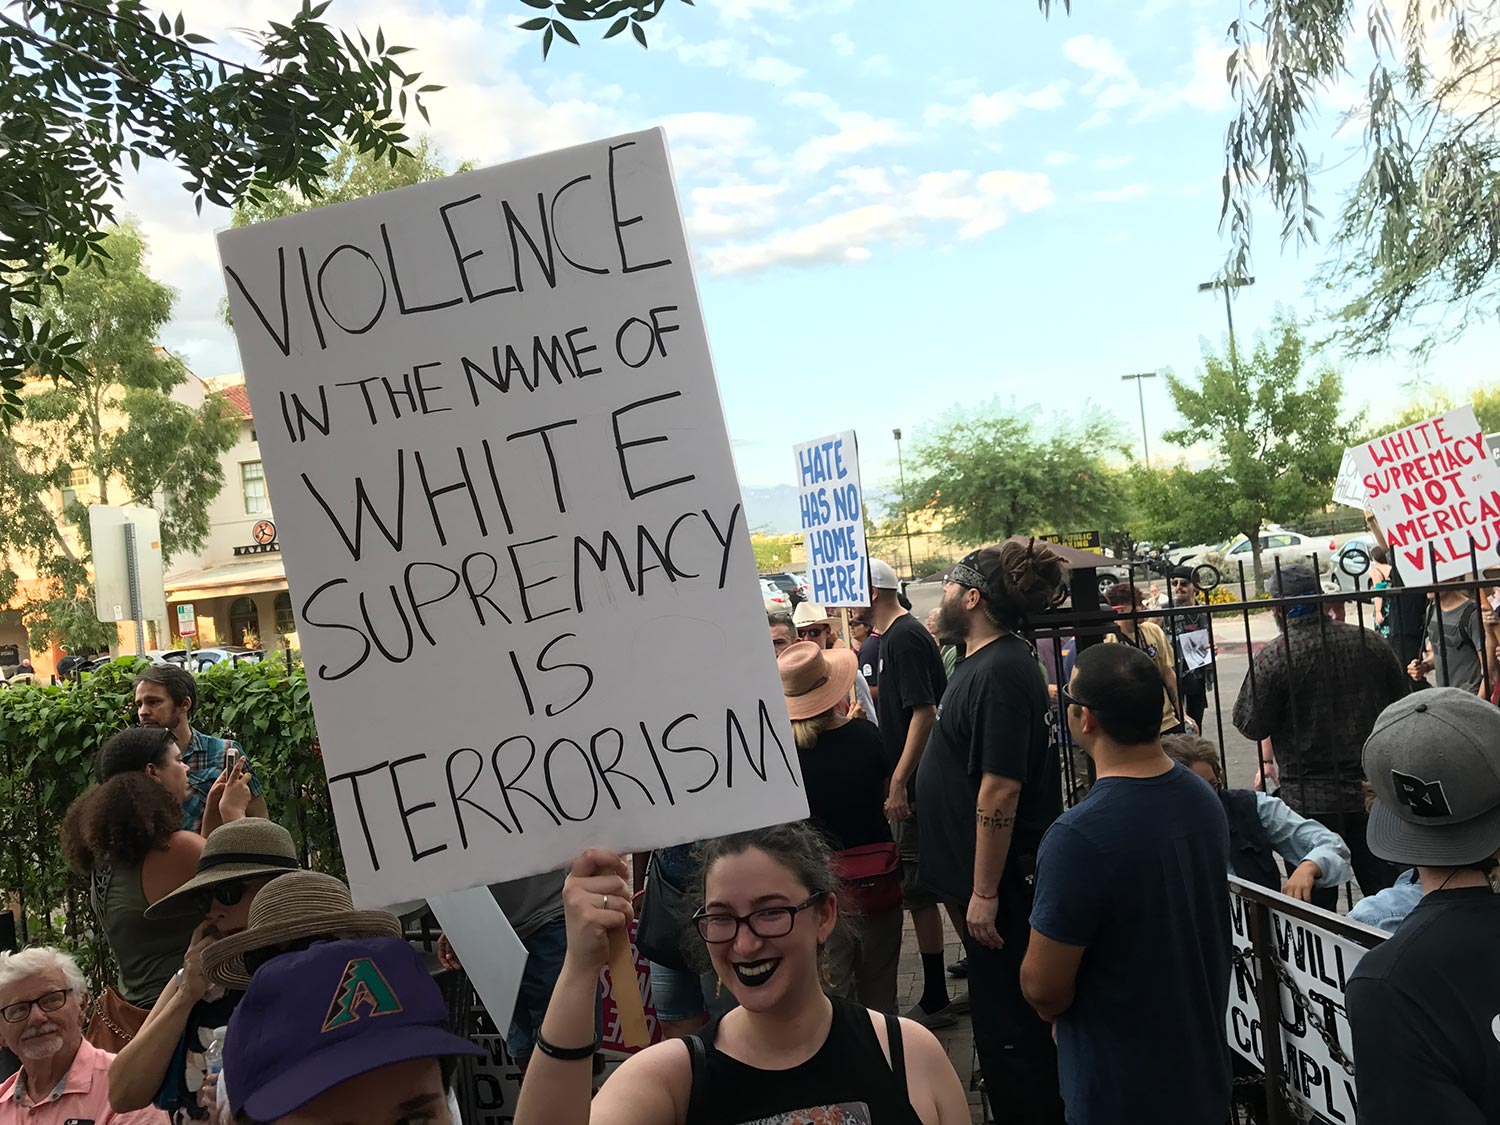 Tucson charlottesville march rally sign